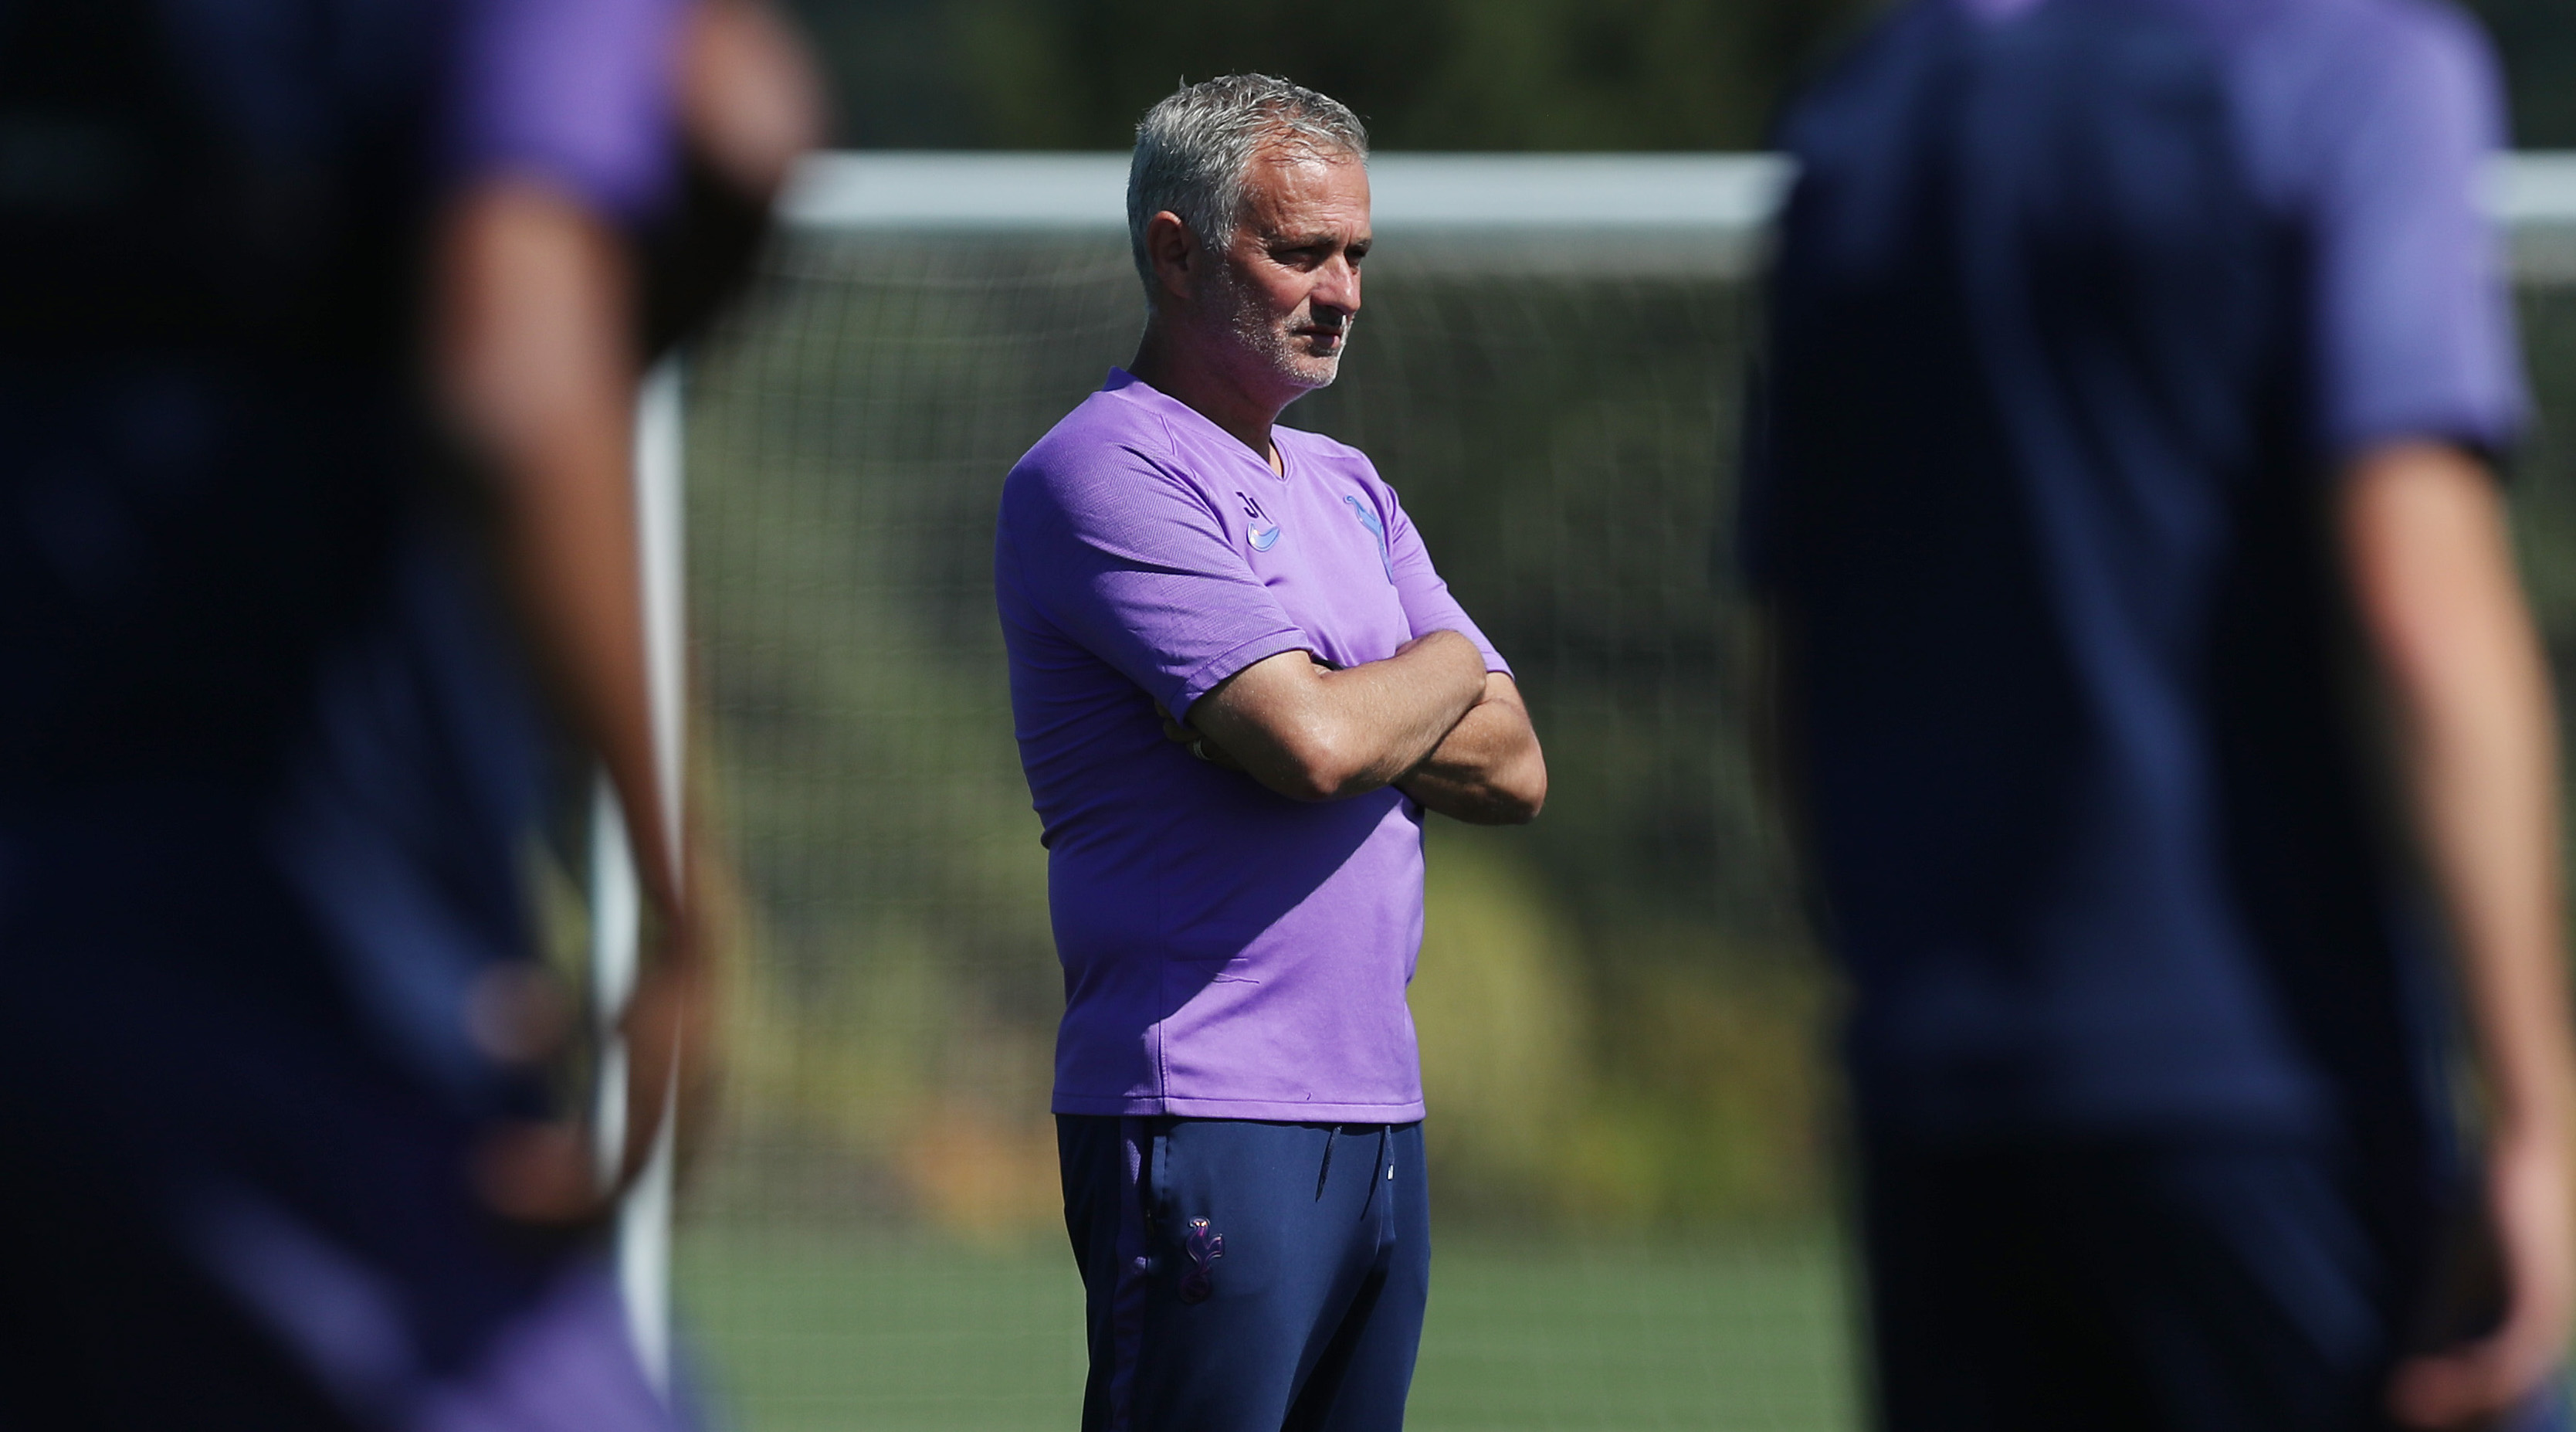 Jose Mourinho is the right man to help Tottenham win a trophy, asserts Lucas Moura